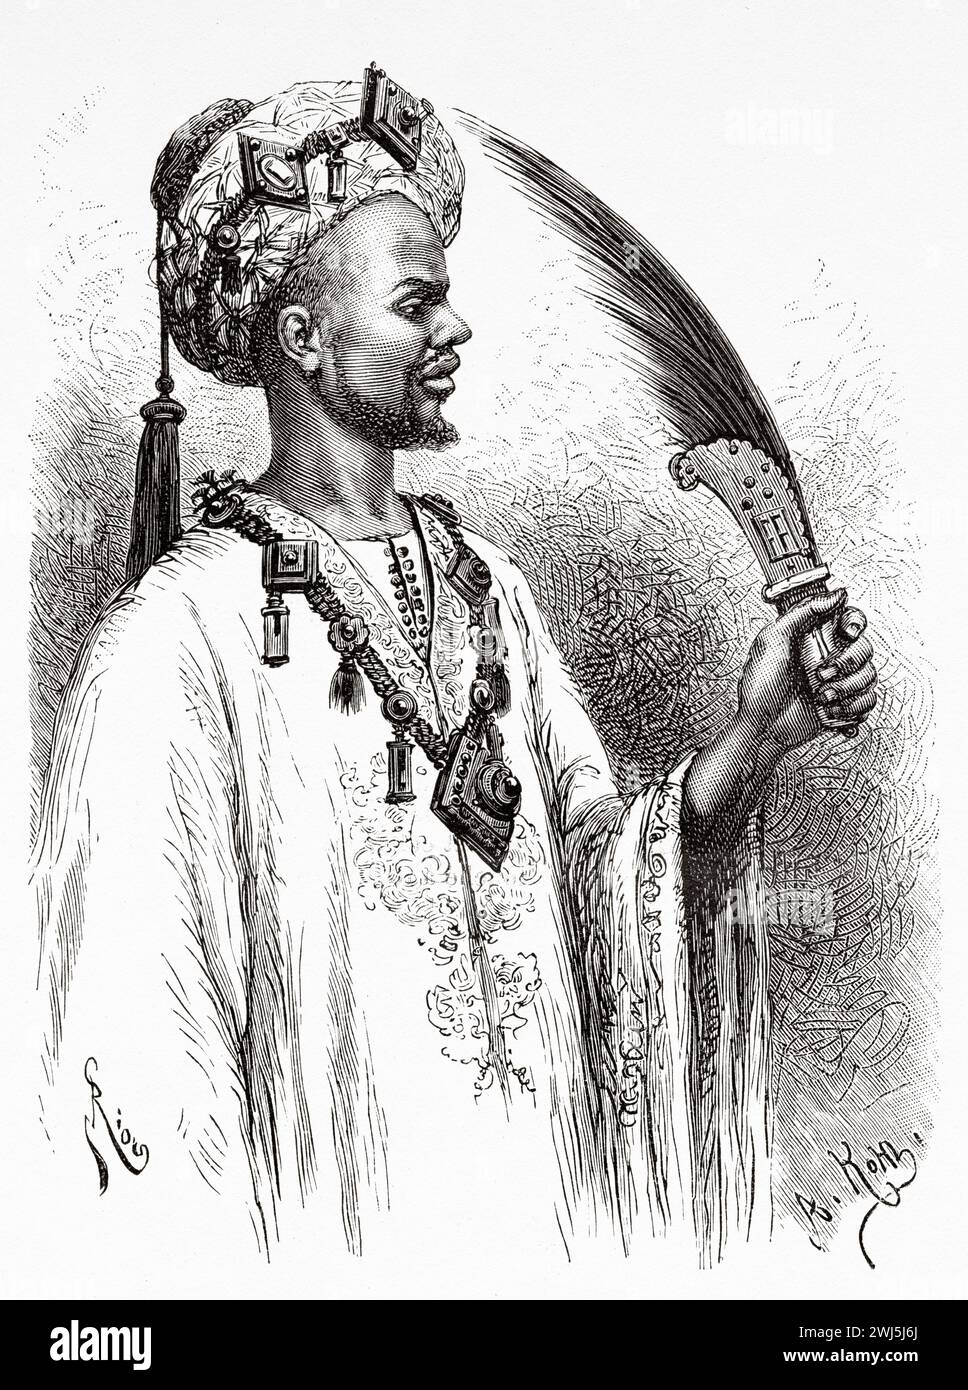 Samory Toure (1828 - 1900) was a Mandinka Muslim cleric, military strategist, and founder of the Wassoulou Empire. Toure resisted French colonial rule in West Africa from 1882 until his capture in 1898, Guinea. Africa. Two campaigns in French Sudan, 1886-1888 by Joseph Simon Gallieni (1849 - 1916) Le Tour du Monde 1890 Stock Photo